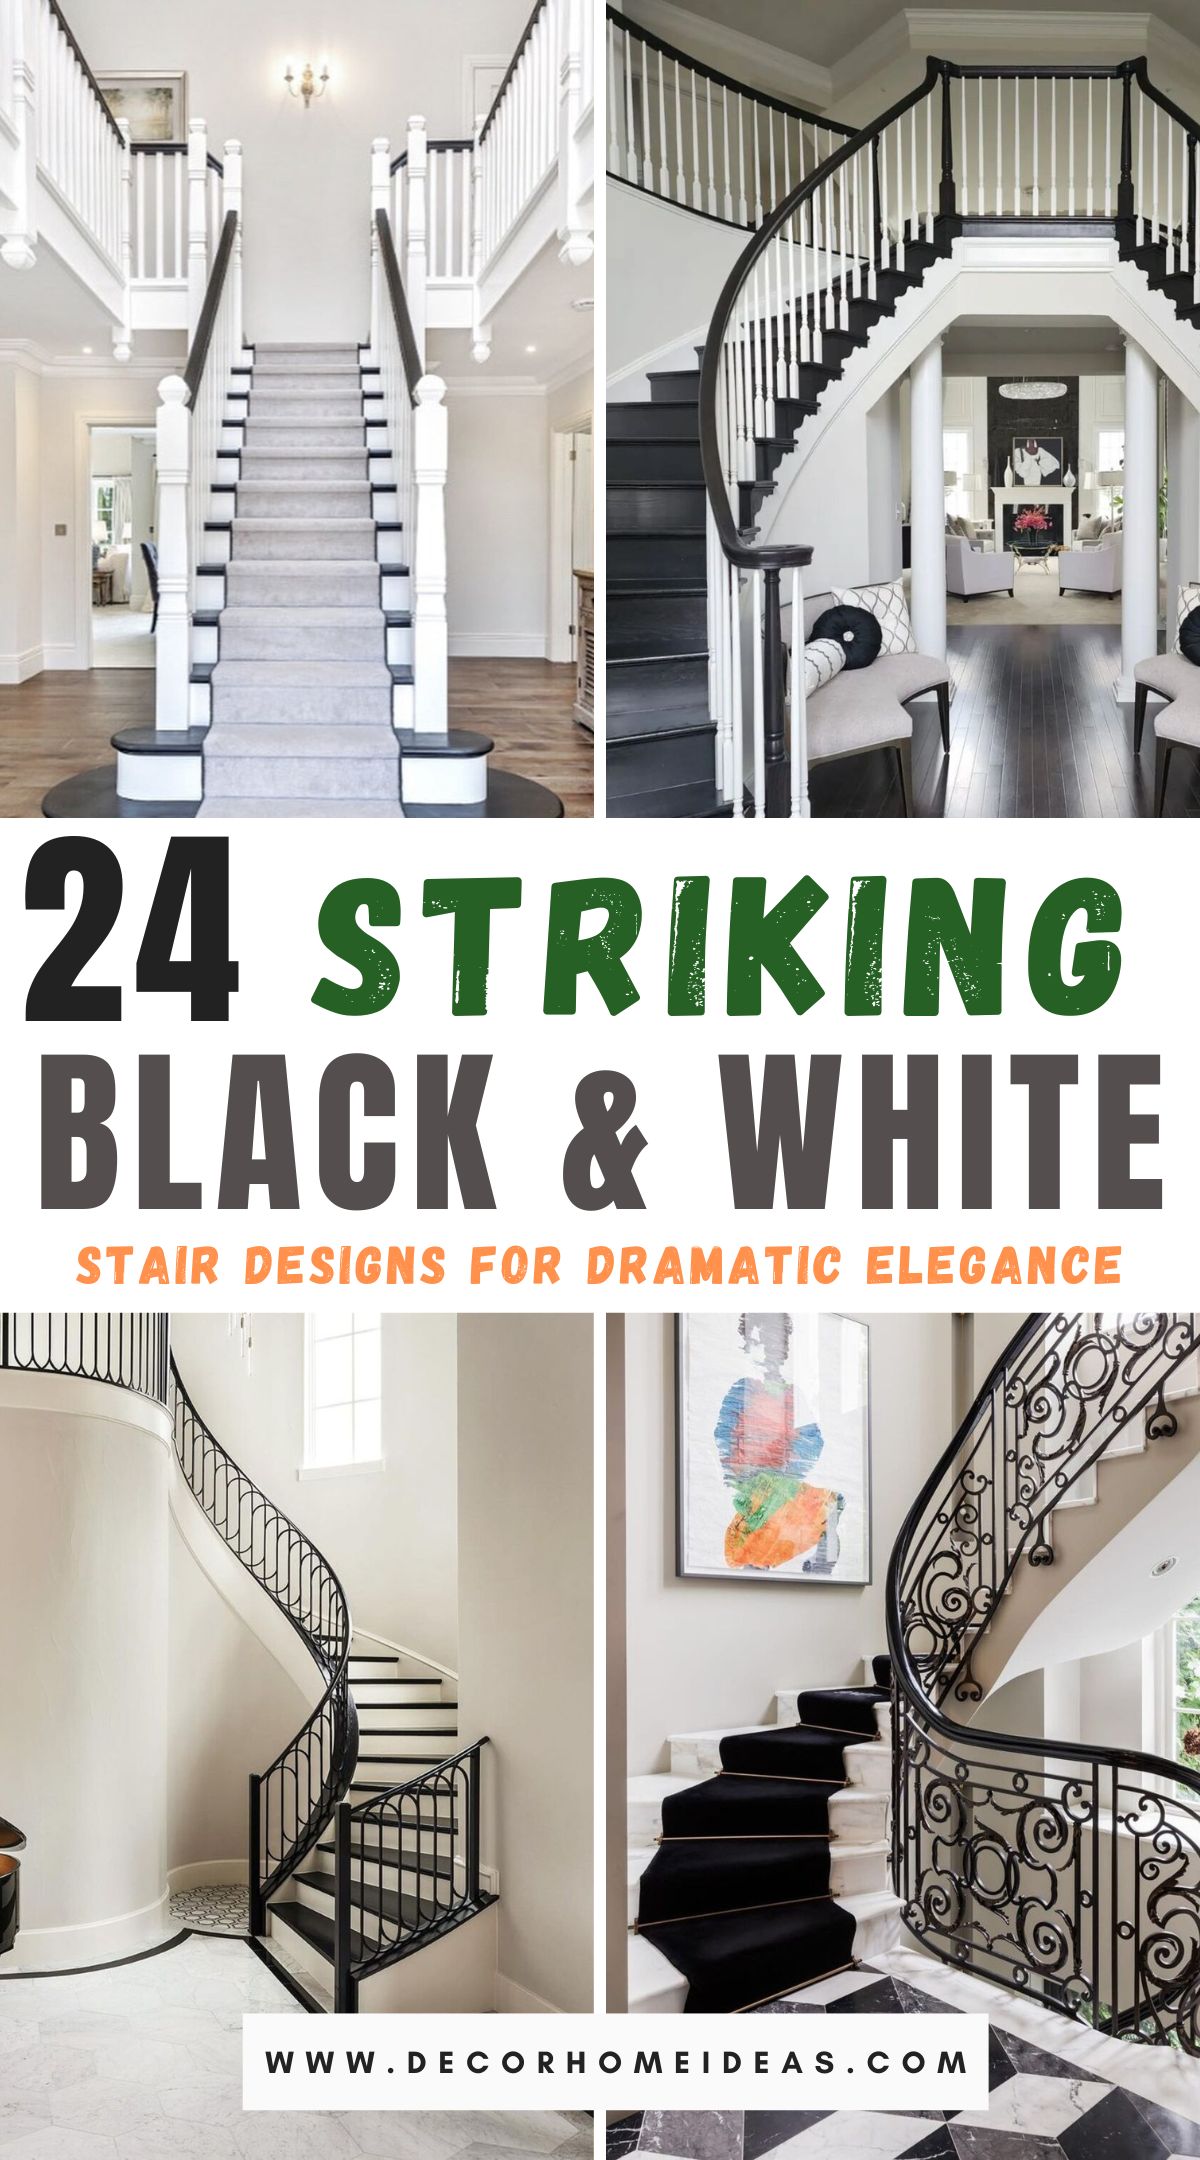 Discover 24 striking black and white stair designs that are sure to impress your guests. From classic elegance to modern minimalism, these designs will elevate the aesthetic appeal of any staircase in your home.